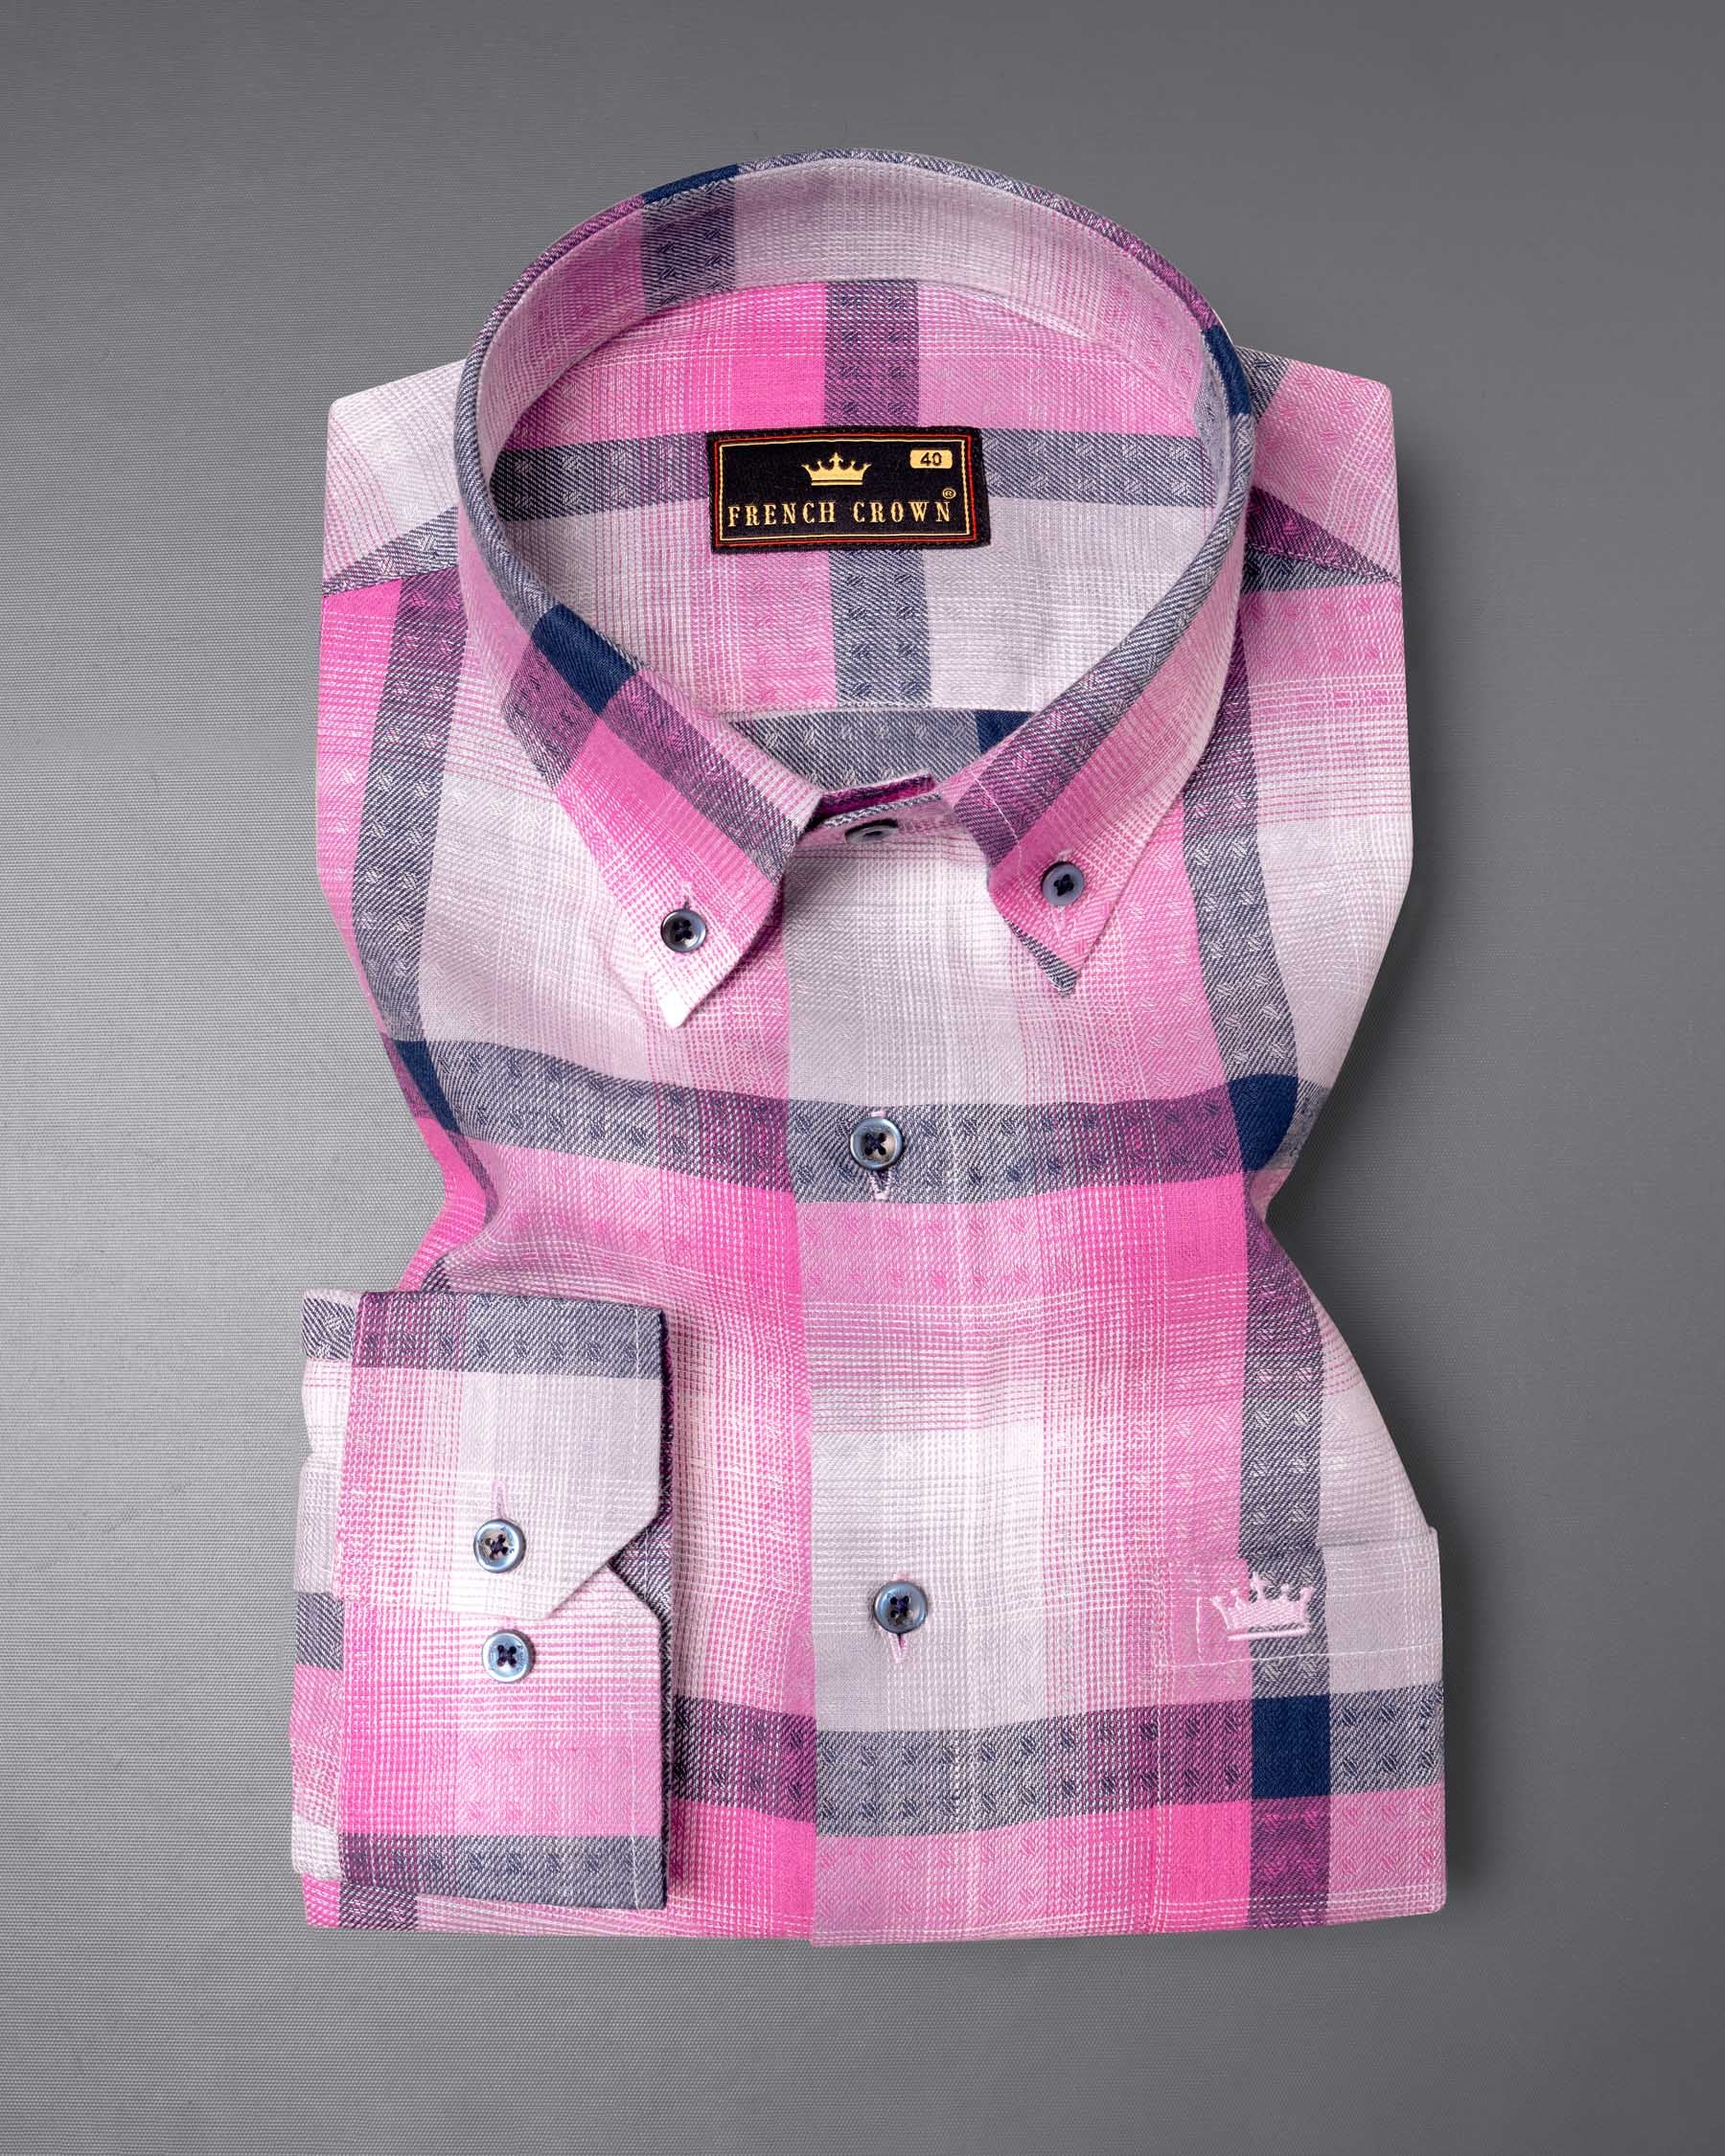 Bright White with Persian Pink Windowpane Twill Premium Cotton Shirt 6125-BD-BLE-38, 6125-BD-BLE-H-38, 6125-BD-BLE-39, 6125-BD-BLE-H-39, 6125-BD-BLE-40, 6125-BD-BLE-H-40, 6125-BD-BLE-42, 6125-BD-BLE-H-42, 6125-BD-BLE-44, 6125-BD-BLE-H-44, 6125-BD-BLE-46, 6125-BD-BLE-H-46, 6125-BD-BLE-48, 6125-BD-BLE-H-48, 6125-BD-BLE-50, 6125-BD-BLE-H-50, 6125-BD-BLE-52, 6125-BD-BLE-H-52